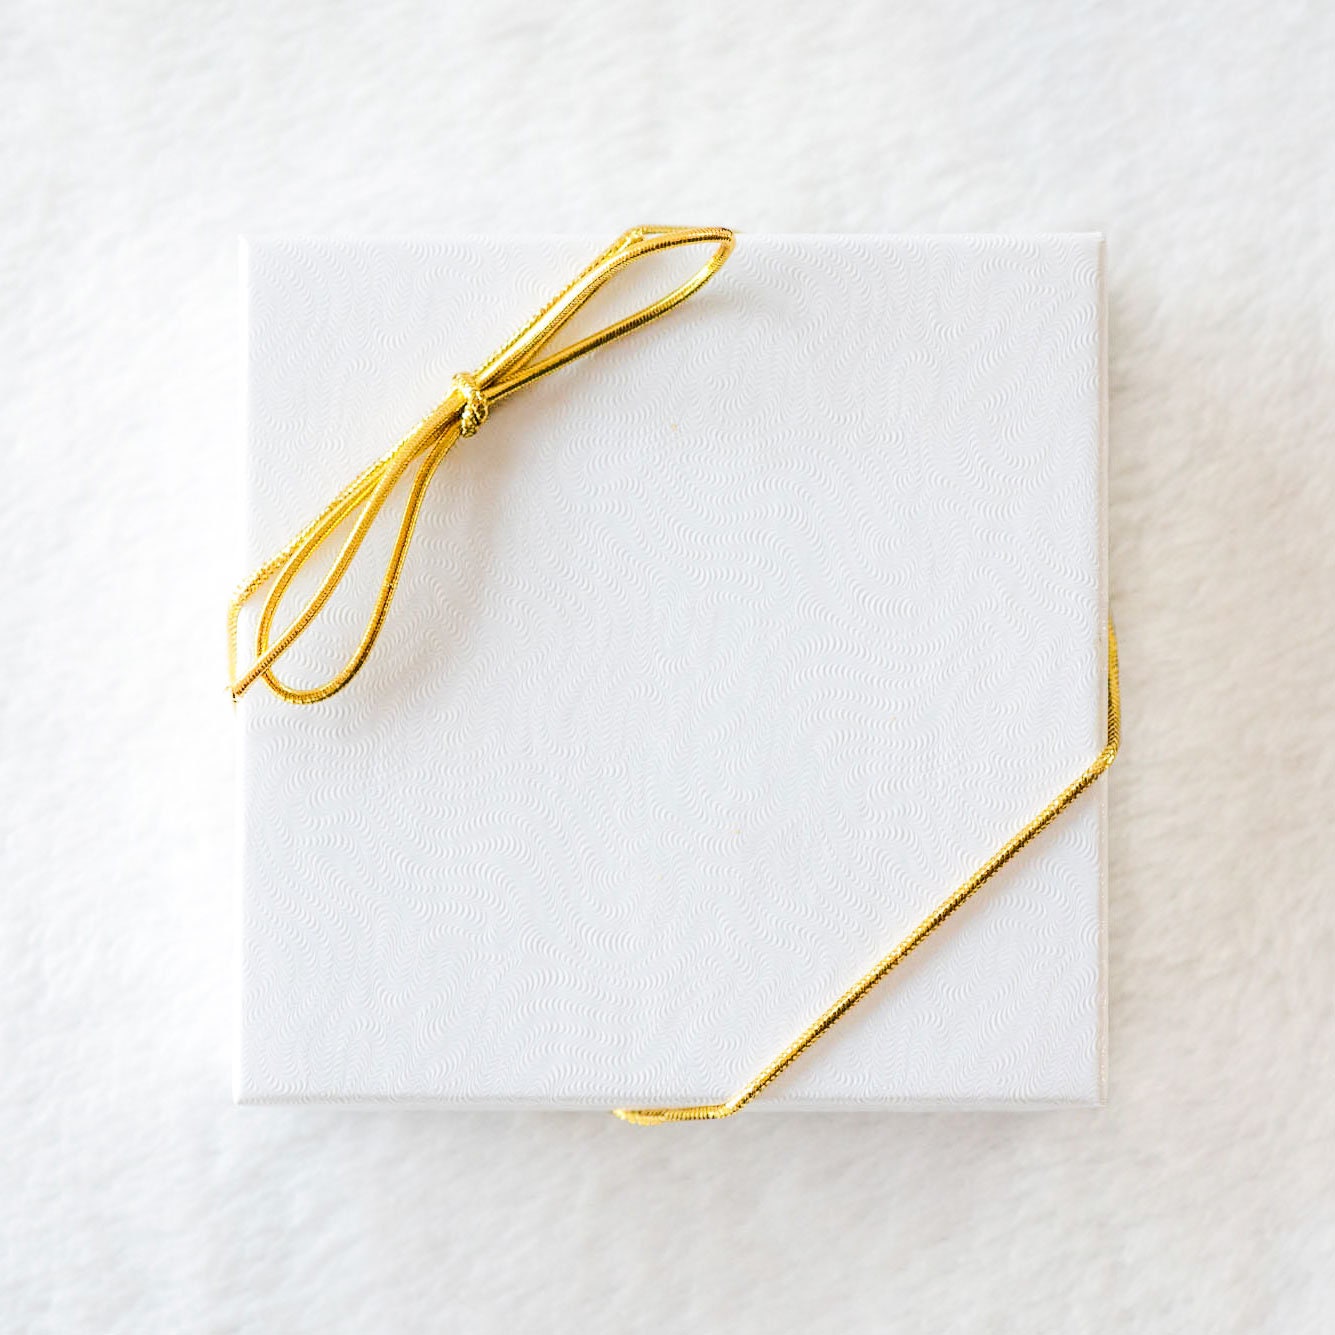 Wedding Wishes: What to Write in a Wedding Card